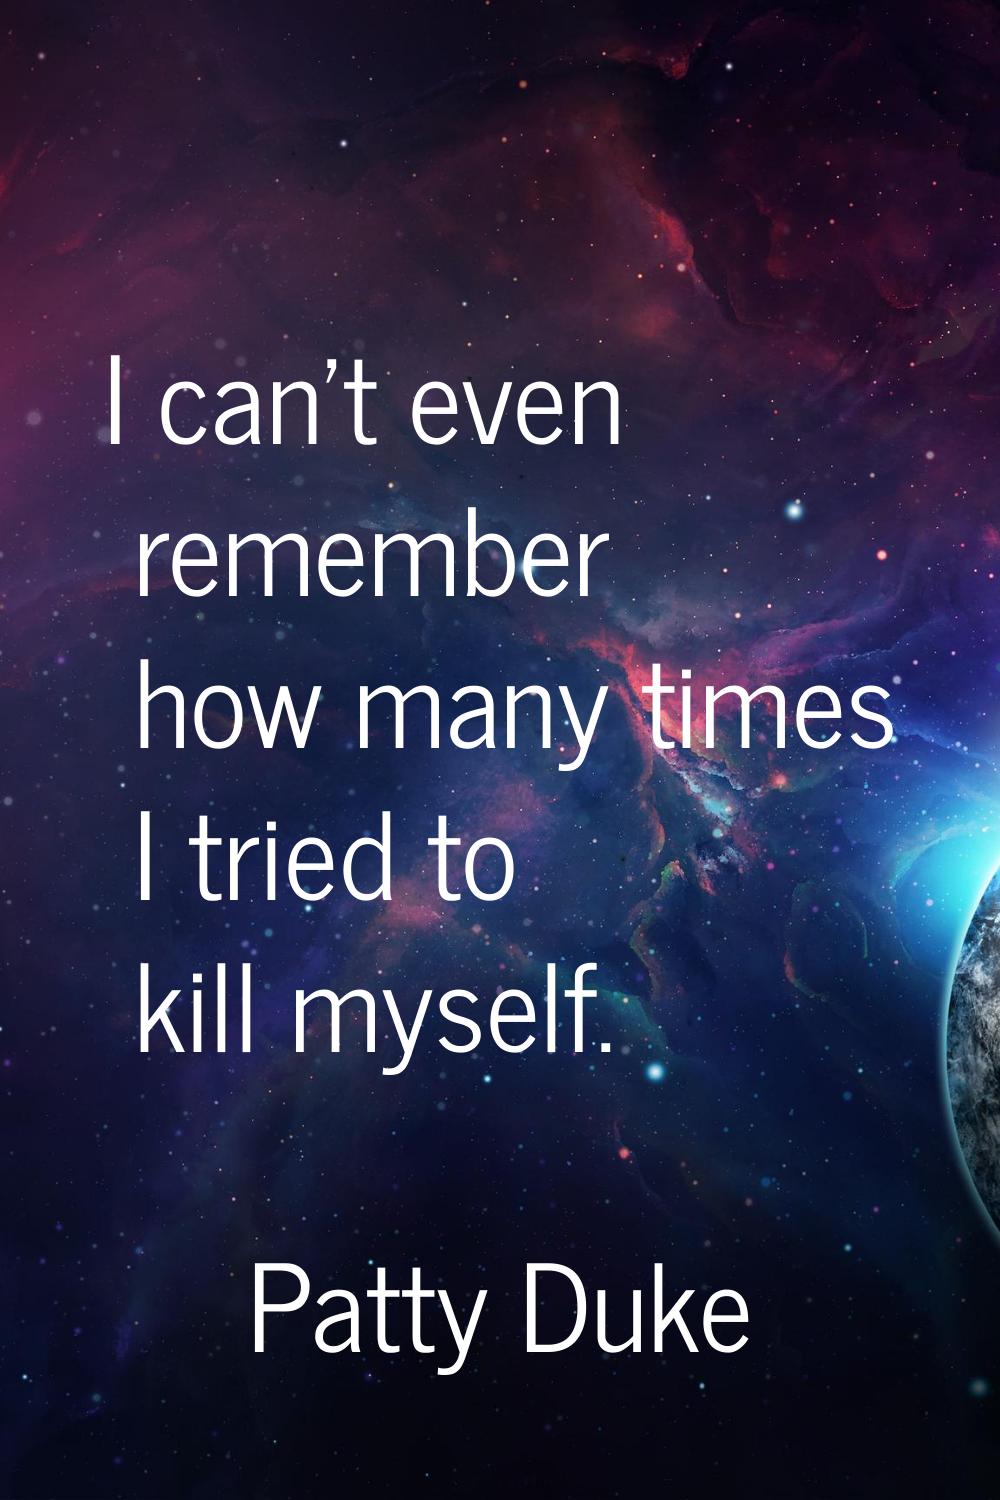 I can't even remember how many times I tried to kill myself.